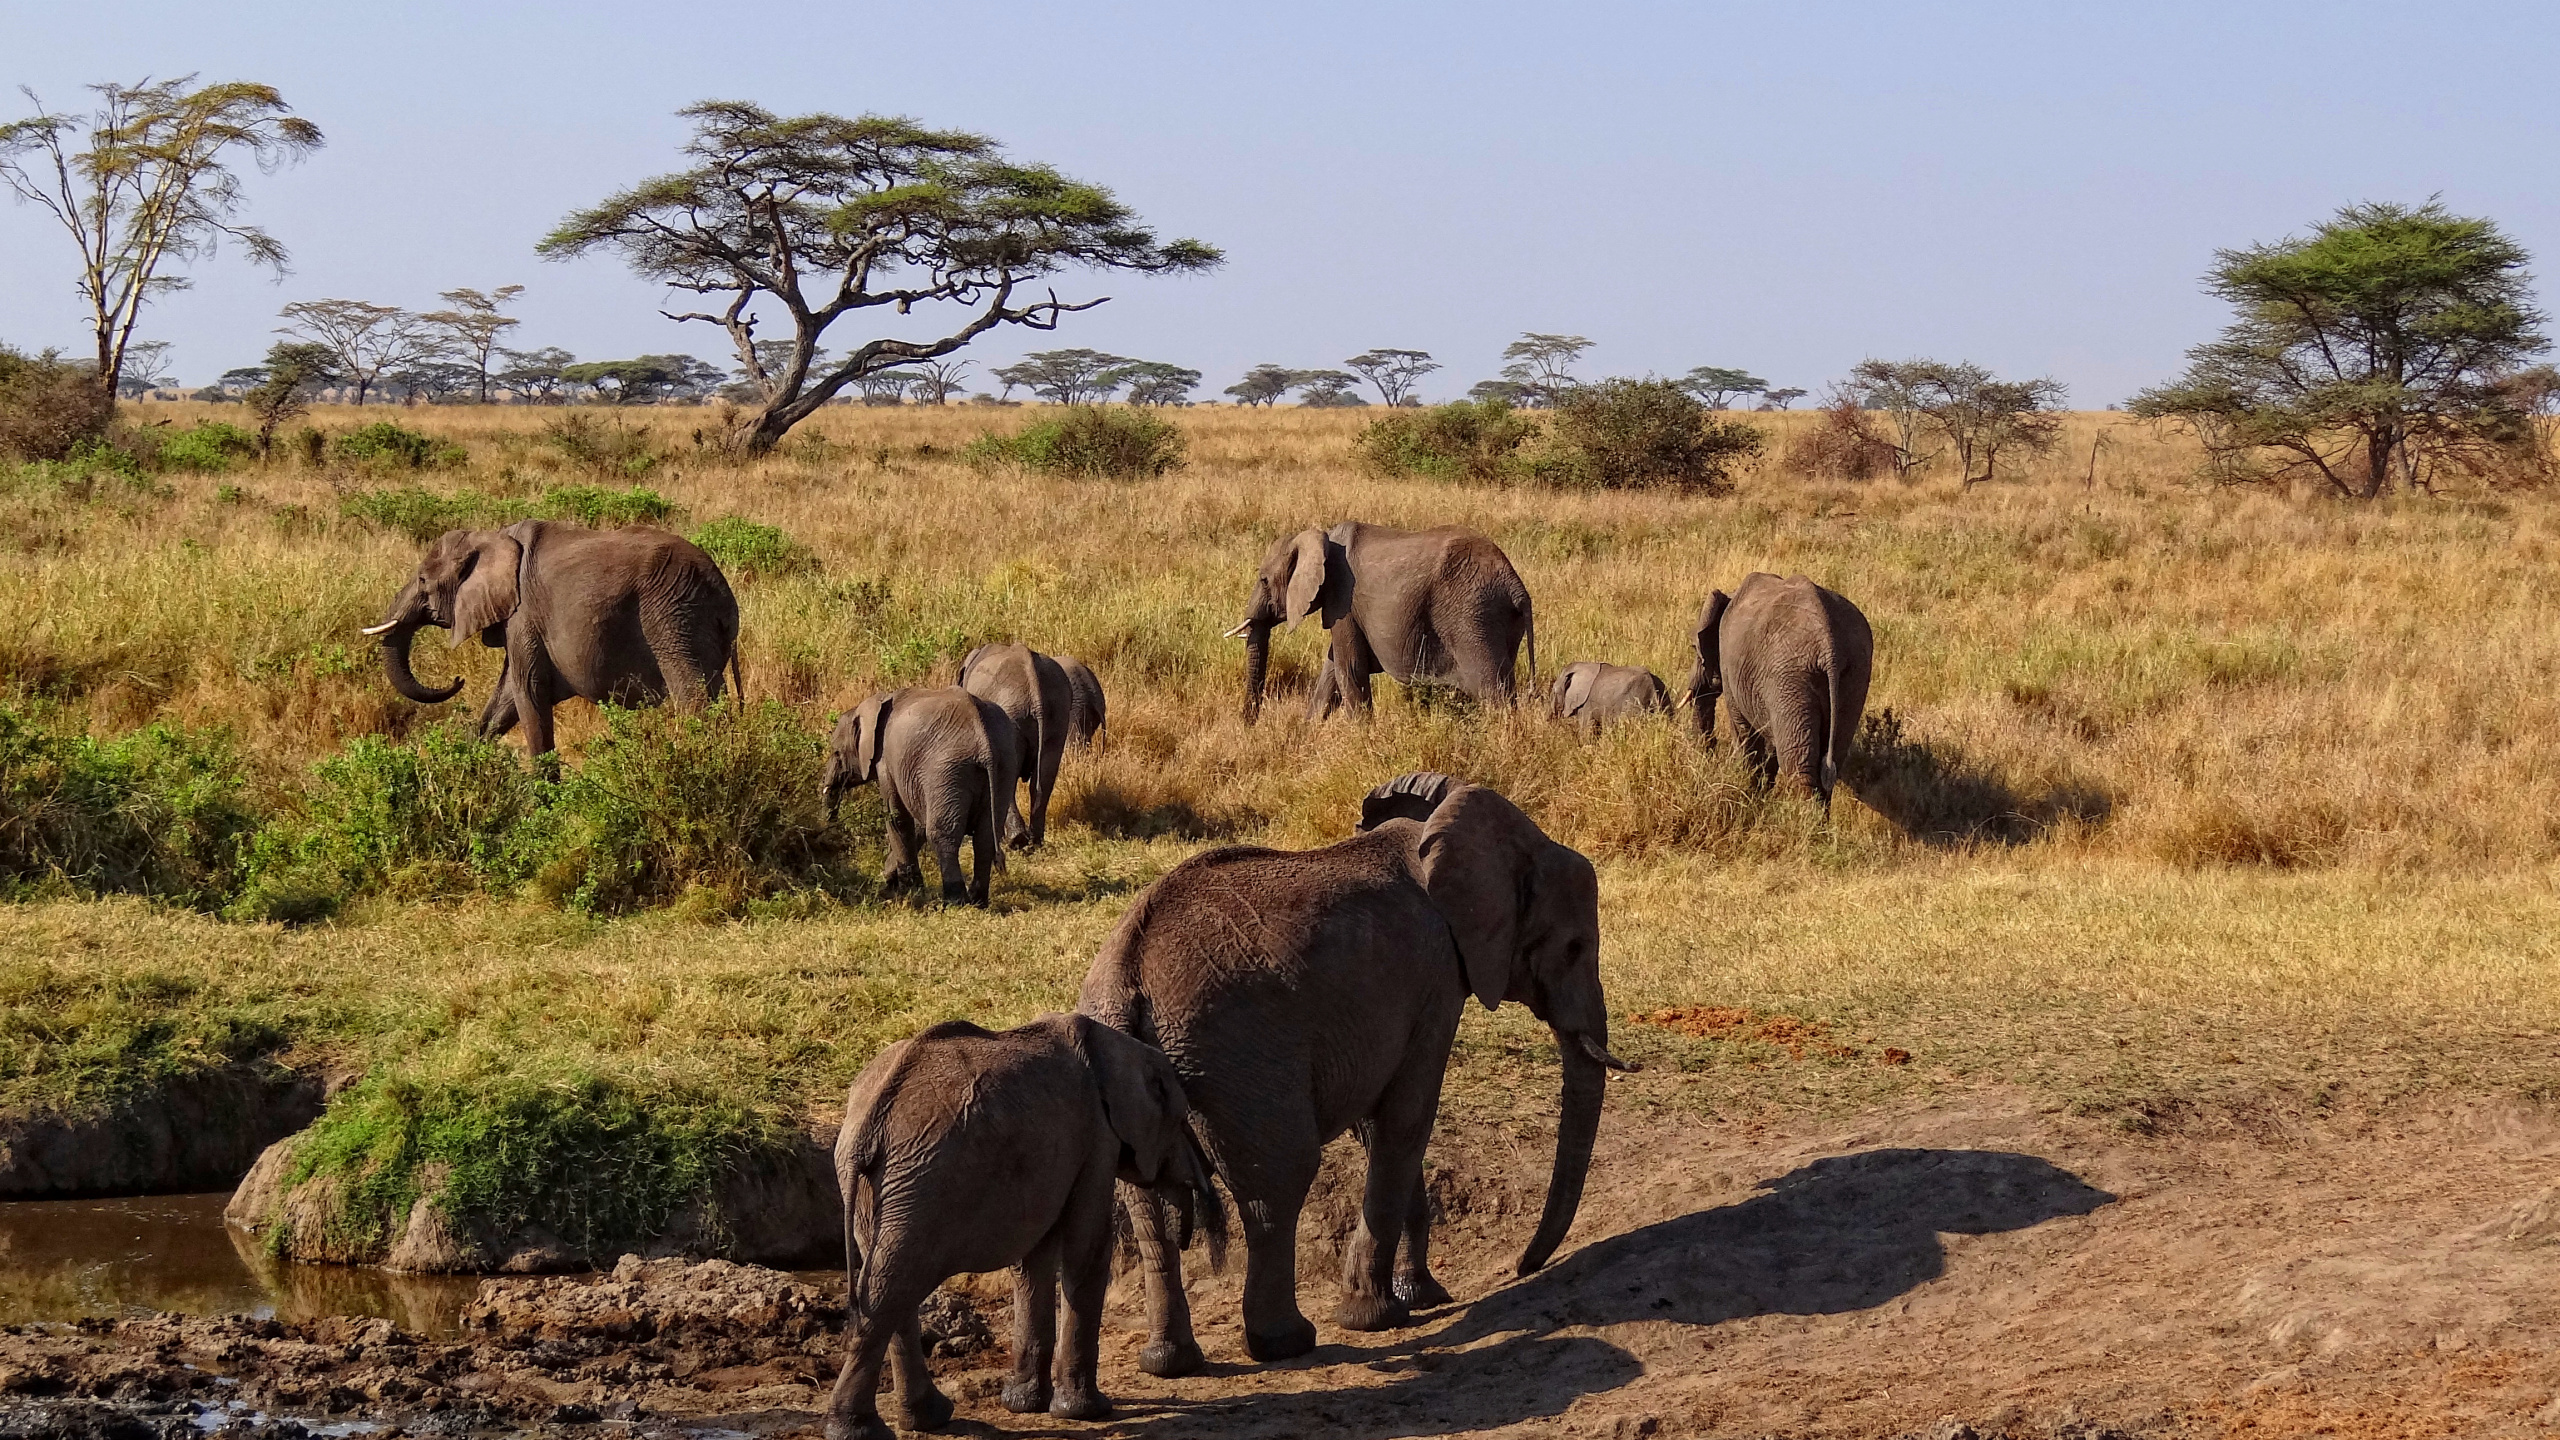 Group of Elephant Walking on Brown Field During Daytime. Wallpaper in 2560x1440 Resolution